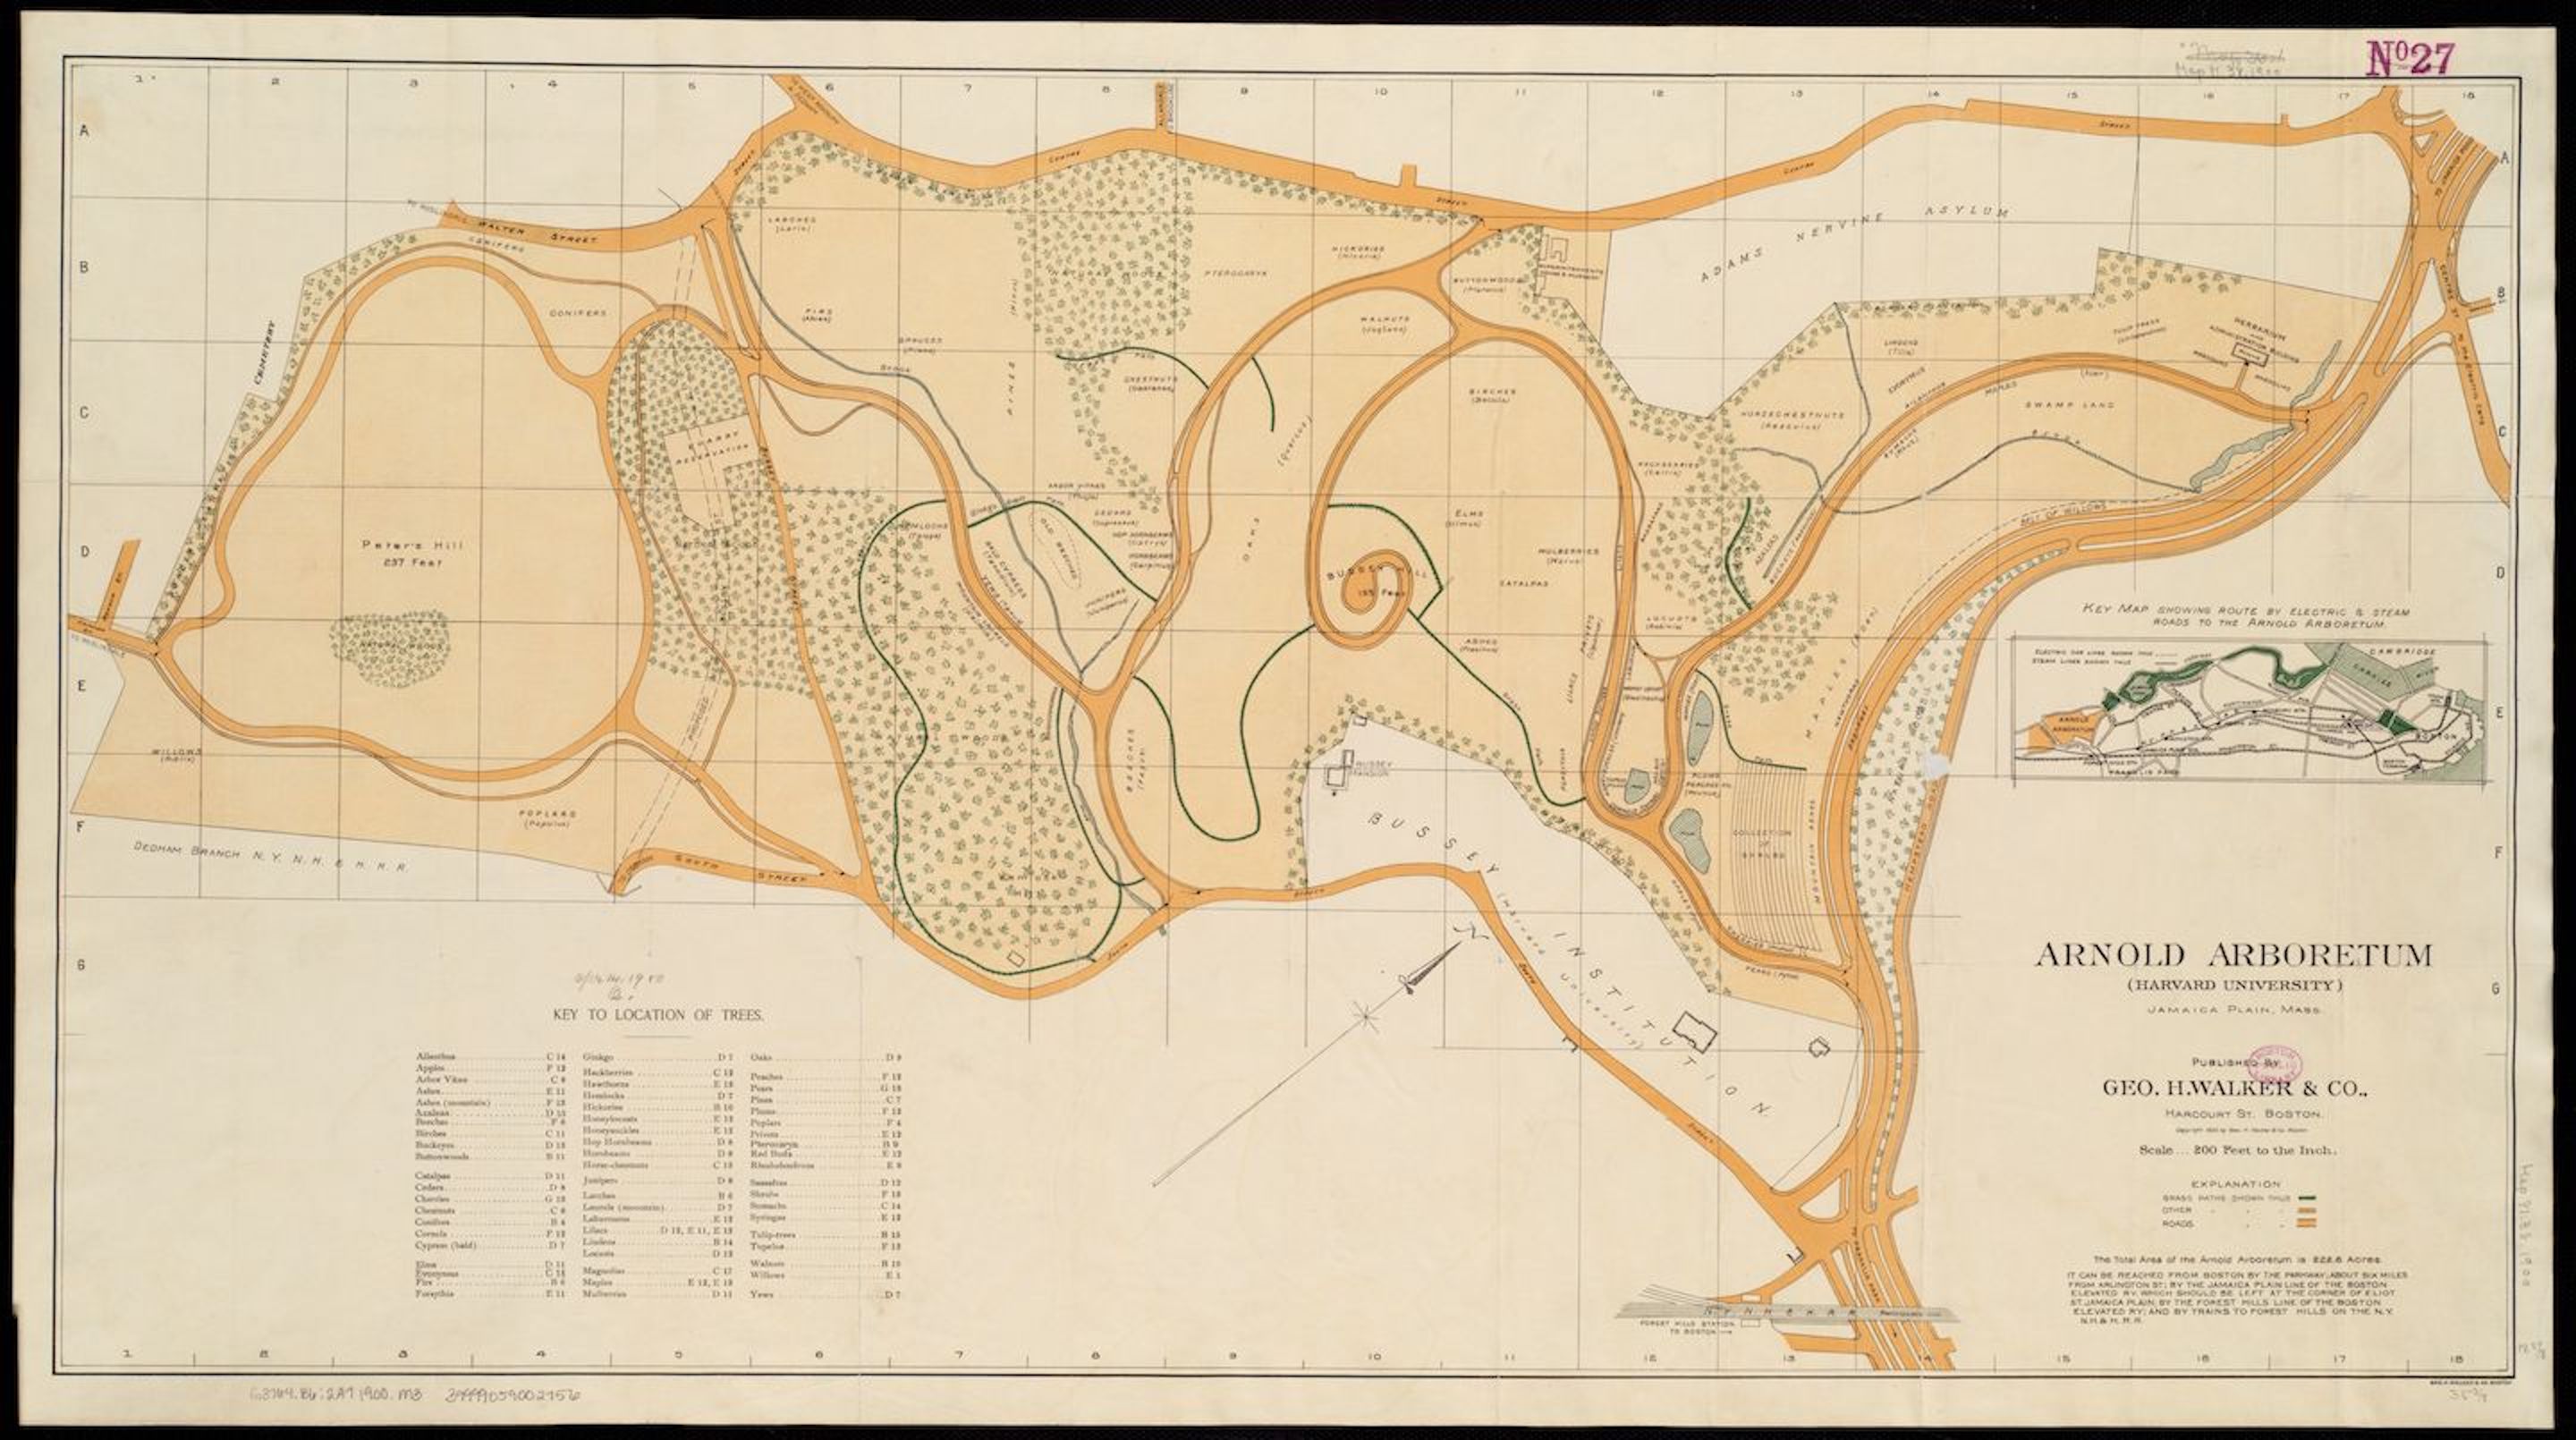 This 1900 map of the Arnold Arboretum includes a key to over 60 types of trees scattered across the park